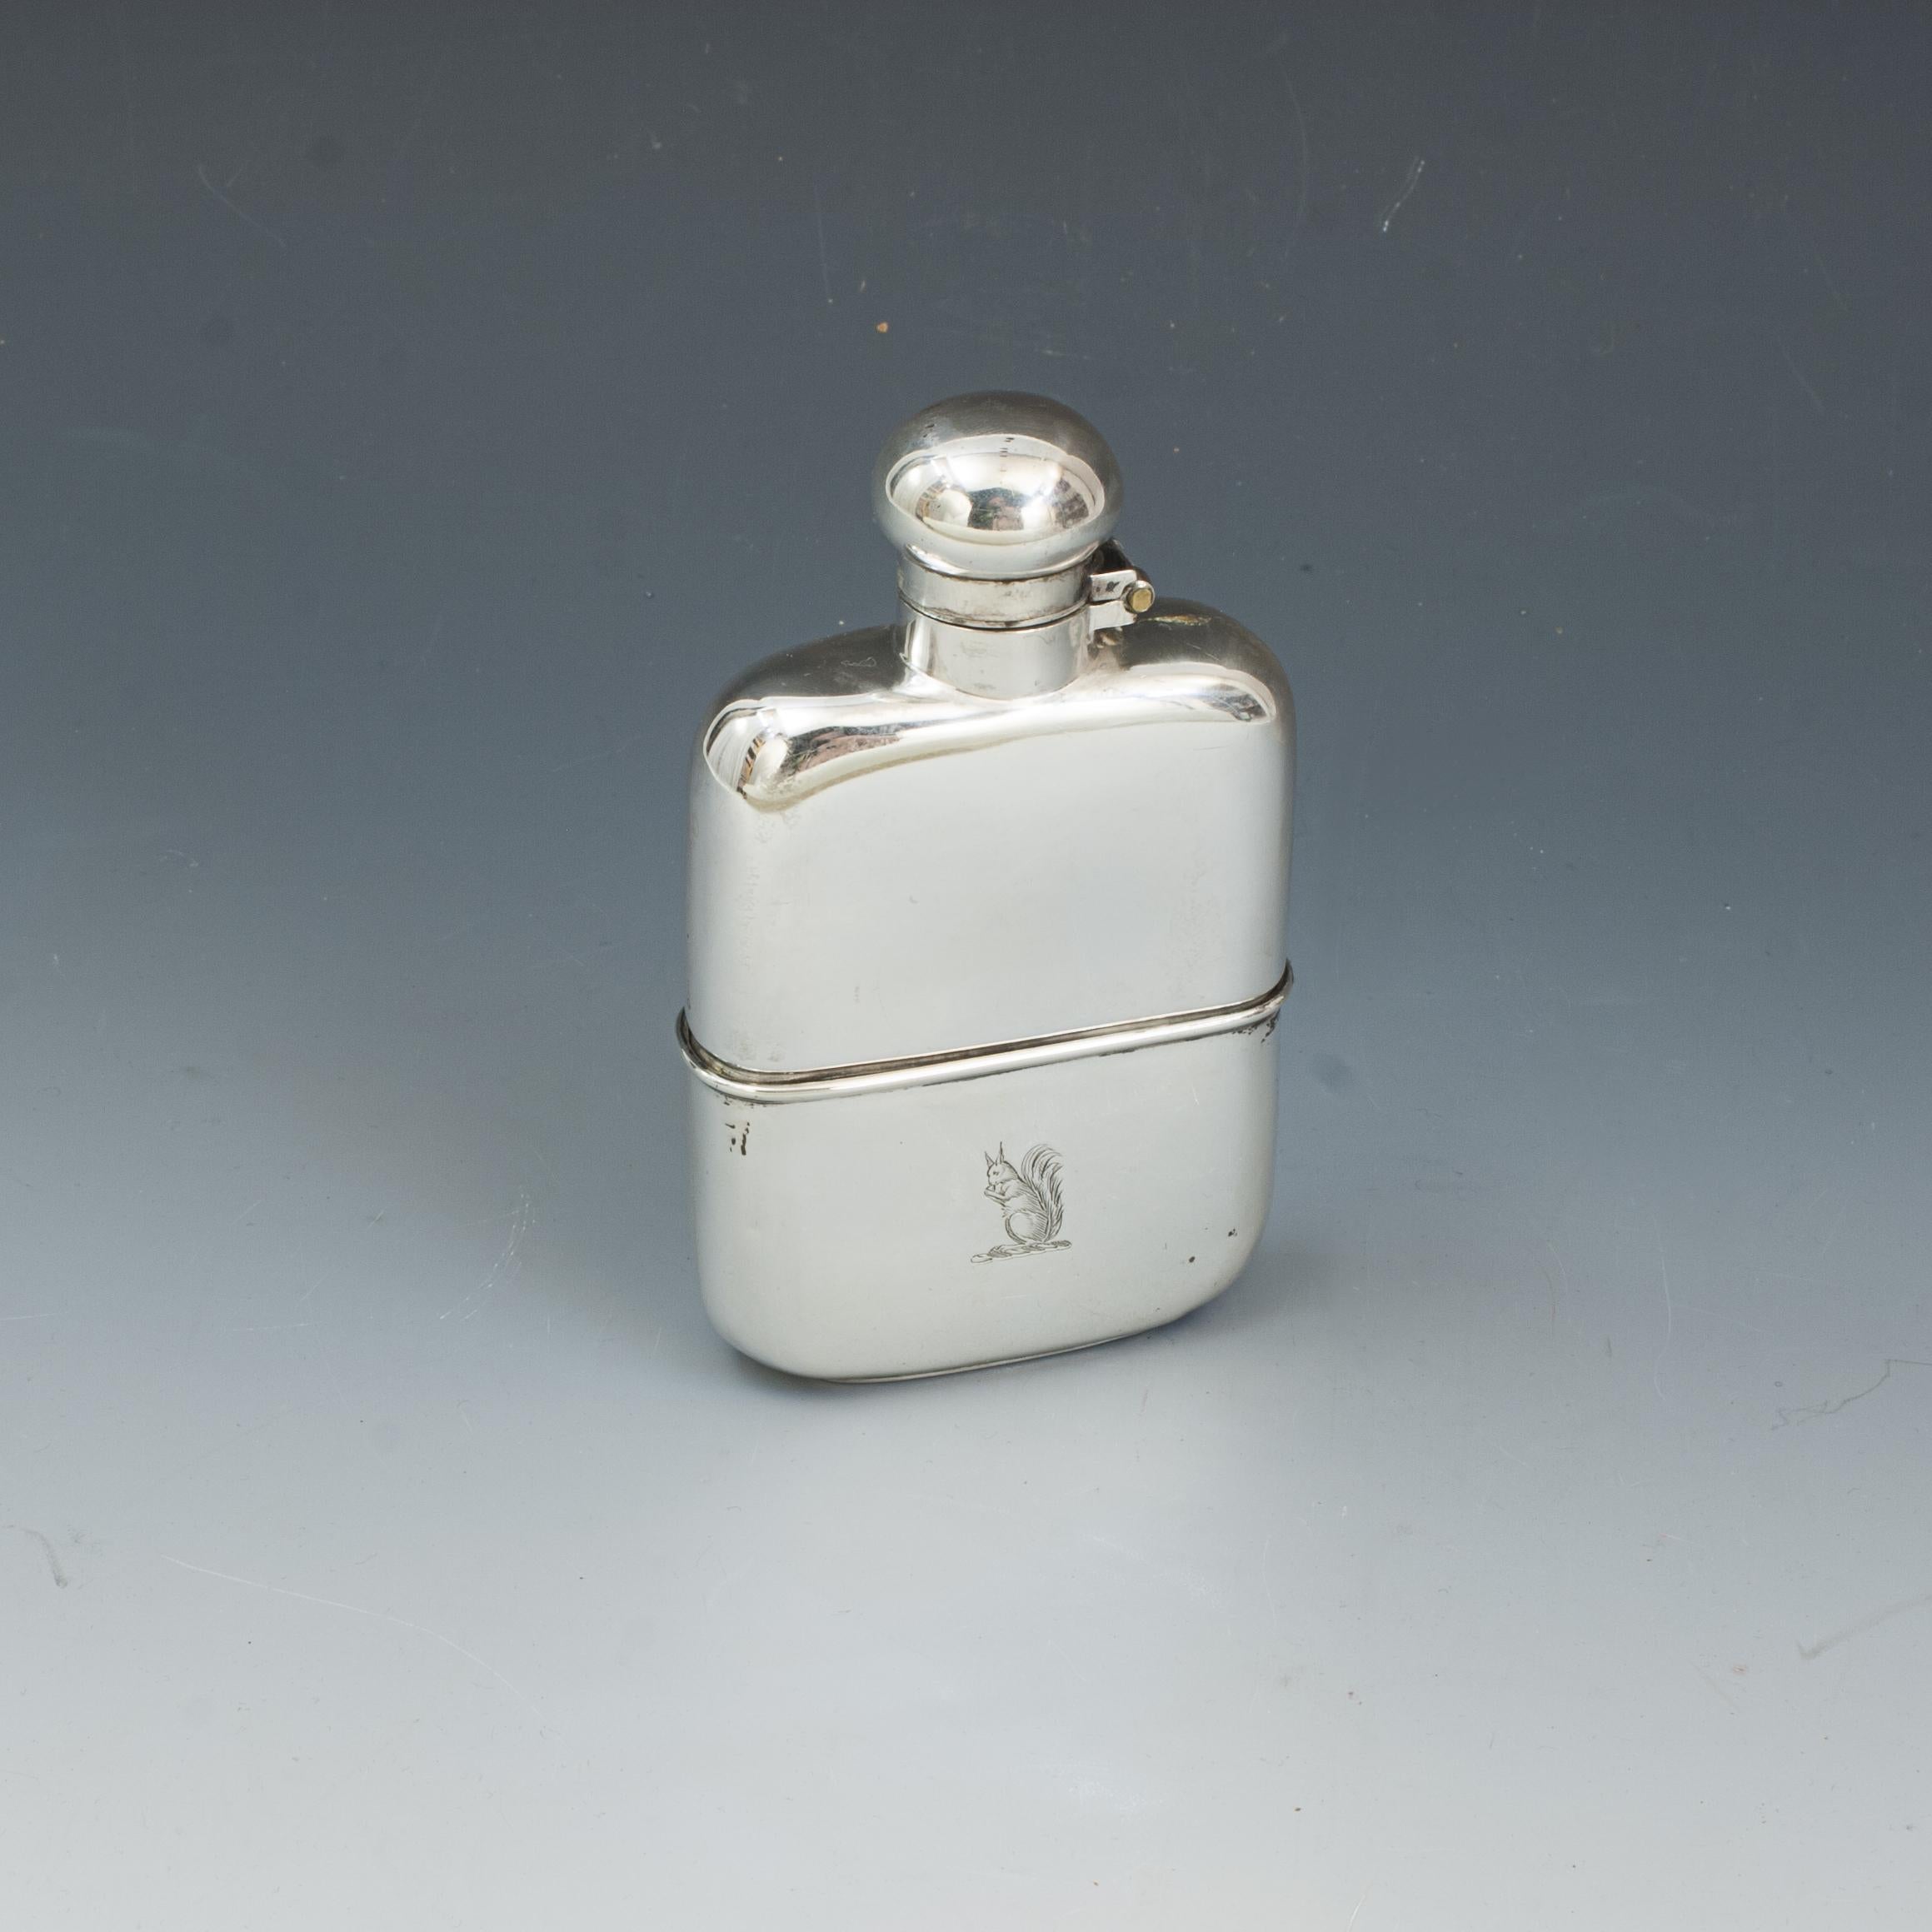 Hawksley Silver Hip Flask.
A beautiful gentleman's pocket silver spirit hip flask by George and John William Hawksley. This exceptional hip flask with plain domed hinged lid with screw bayonet fitting and retaining the original push fit drinking cup